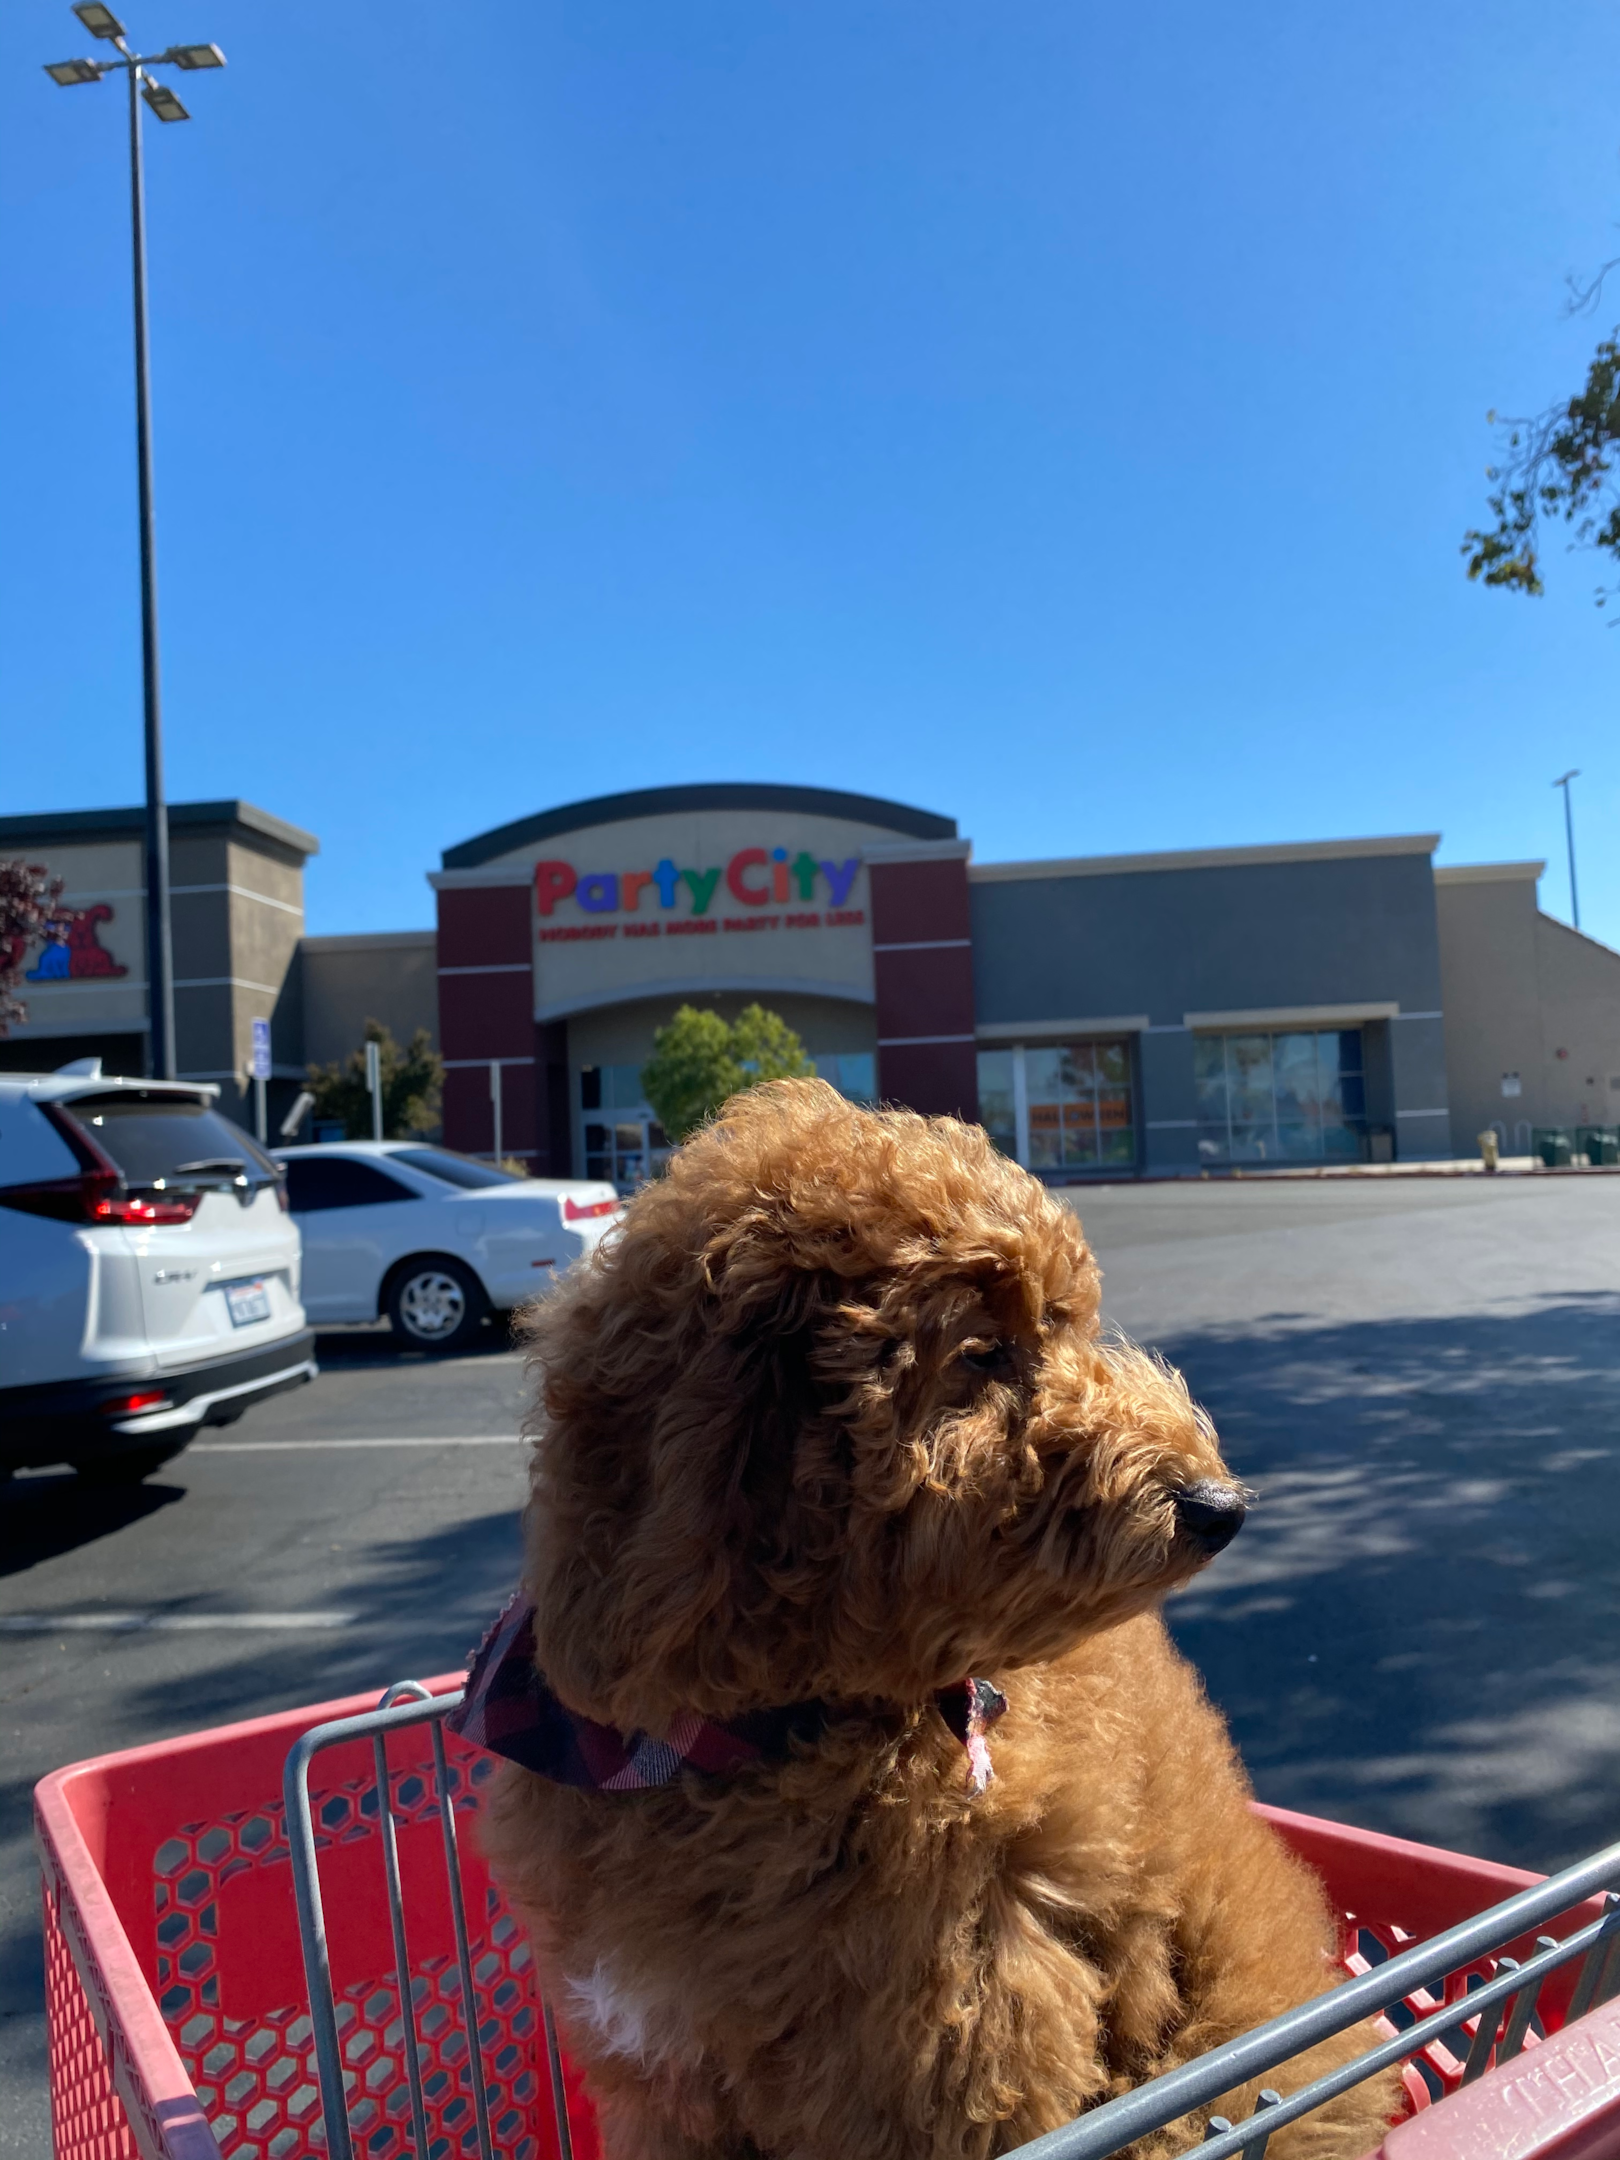 Image of a dog in a cart in front of a Party City location.